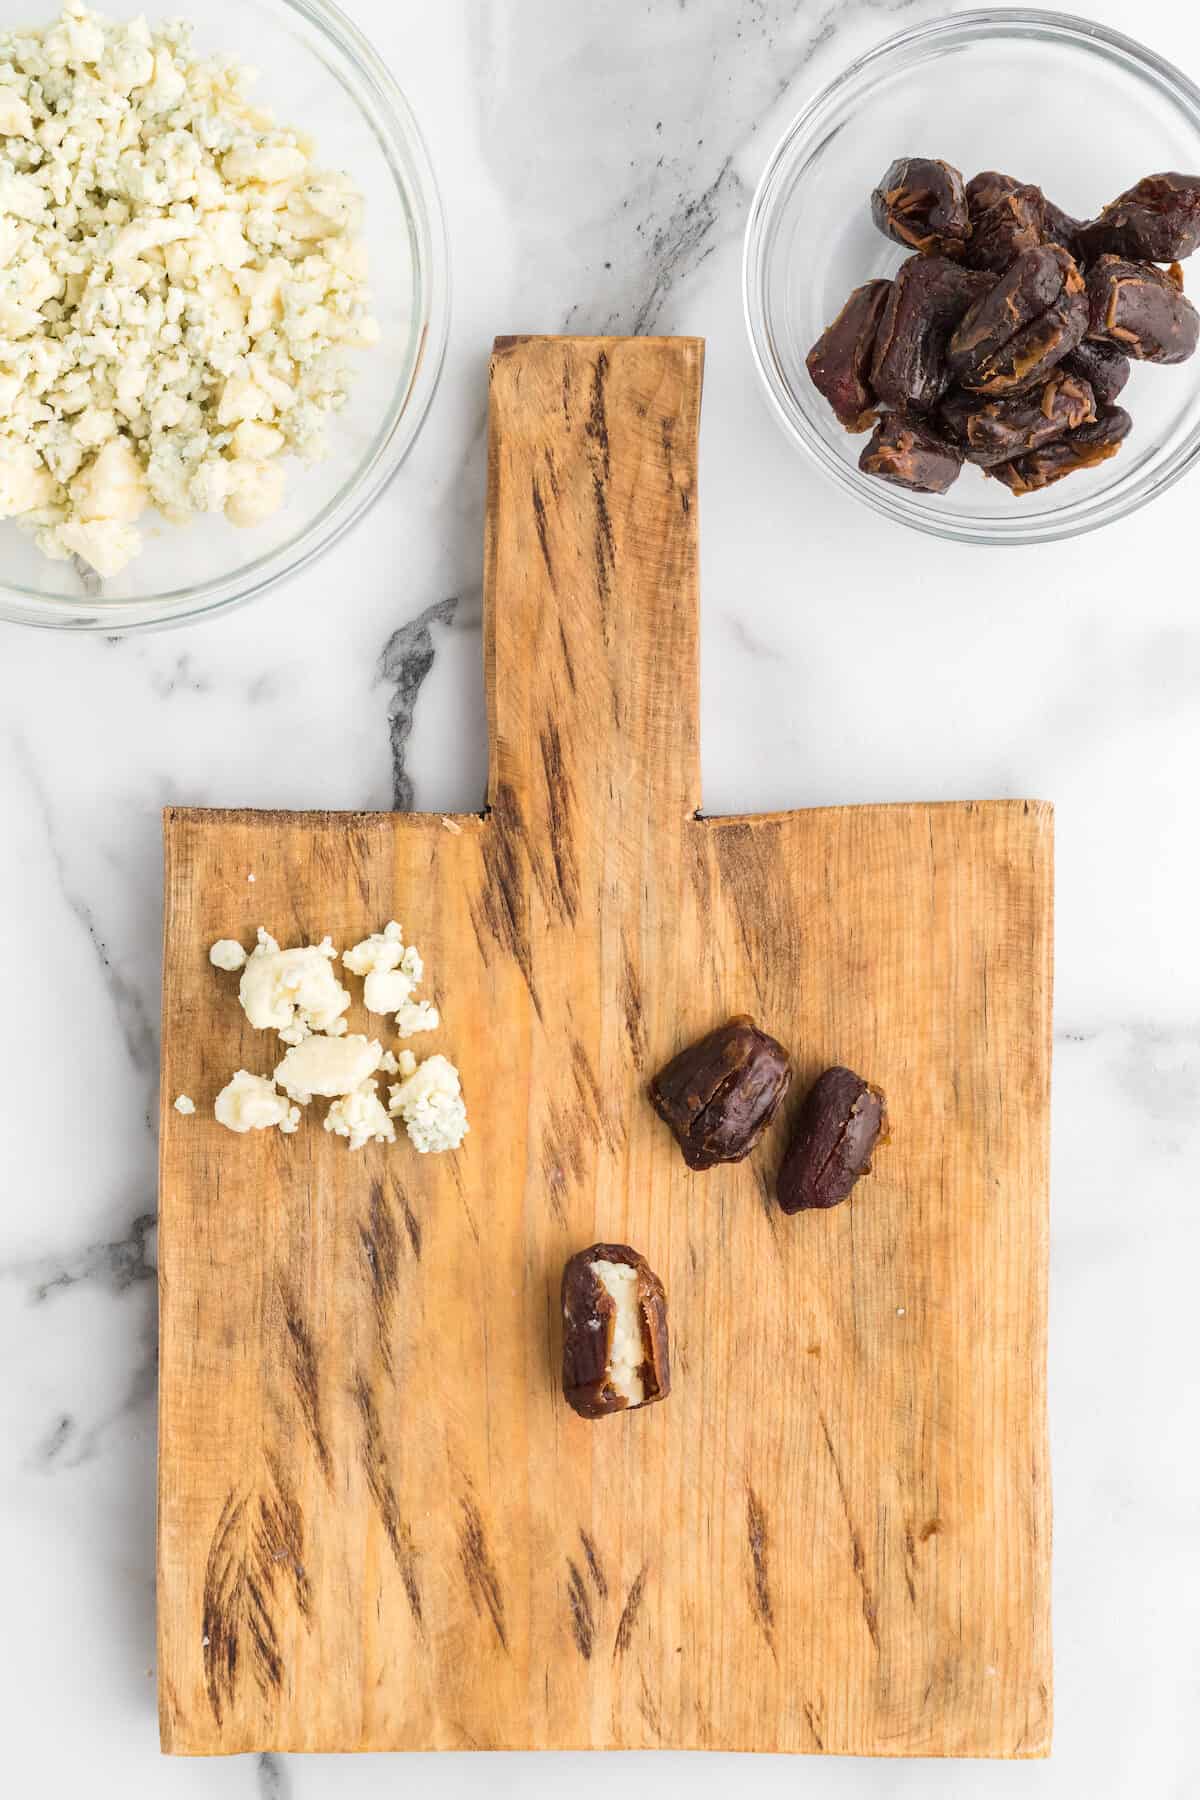 stuffing the dates with gorgonzola cheese.